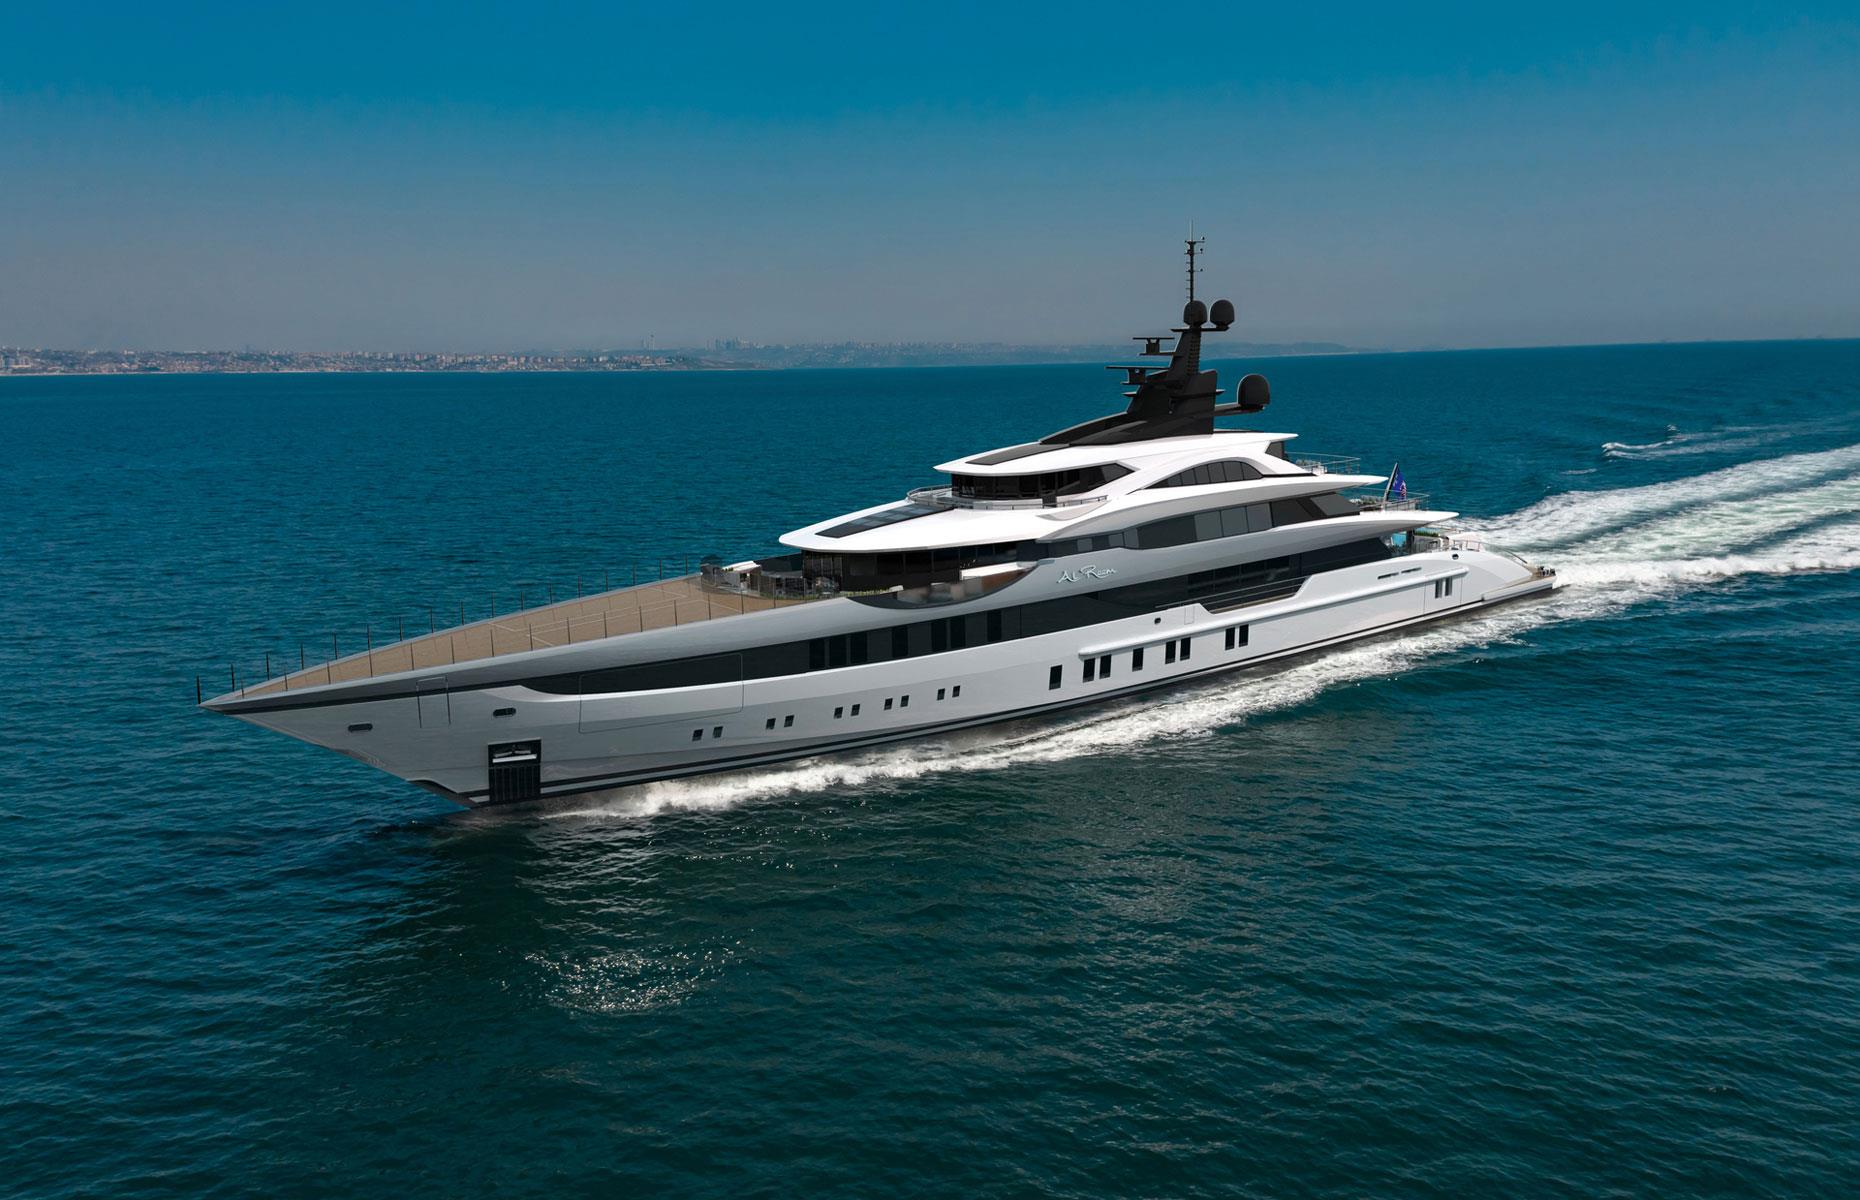 <p>Formally known as<em> Silence</em>, <em>Al Reem</em> is getting its finishing touches at the Bilgin shipyard in Türkiye's capital, Istanbul.</p>  <p>Spanning 263 feet, the superyacht showcases Bilgin's signature style – think razor-sharp exterior lines and a super-slender profile – with naval architecture by Turkish studio Unique Yacht Design. It's the third unit of Bilgin's 263 Series and the most advanced of the trio.</p>